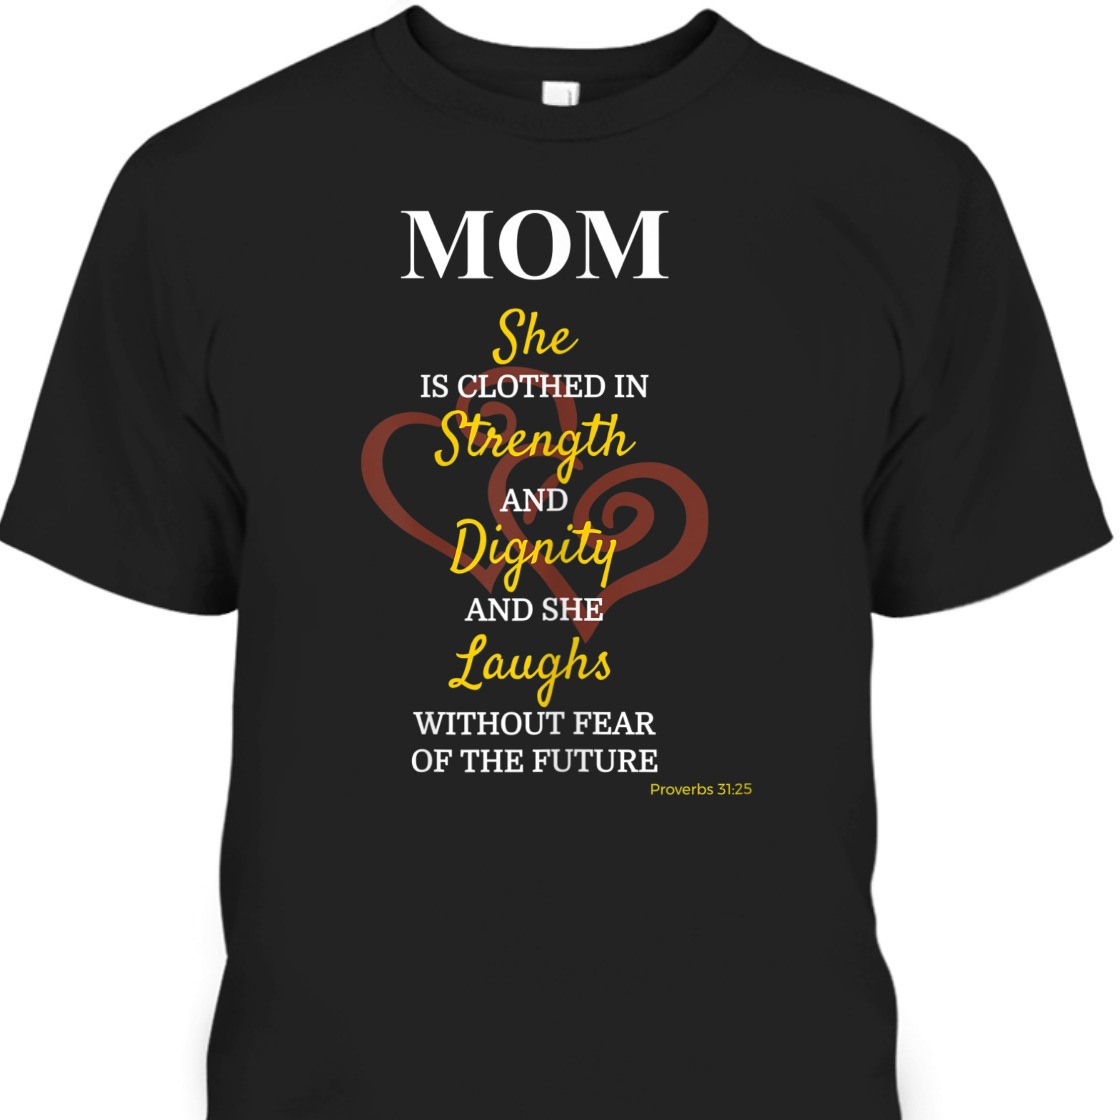 She Is Clothed In Strength And Dignity T-Shirt Proverbs 31:25 Mother's Day Gift